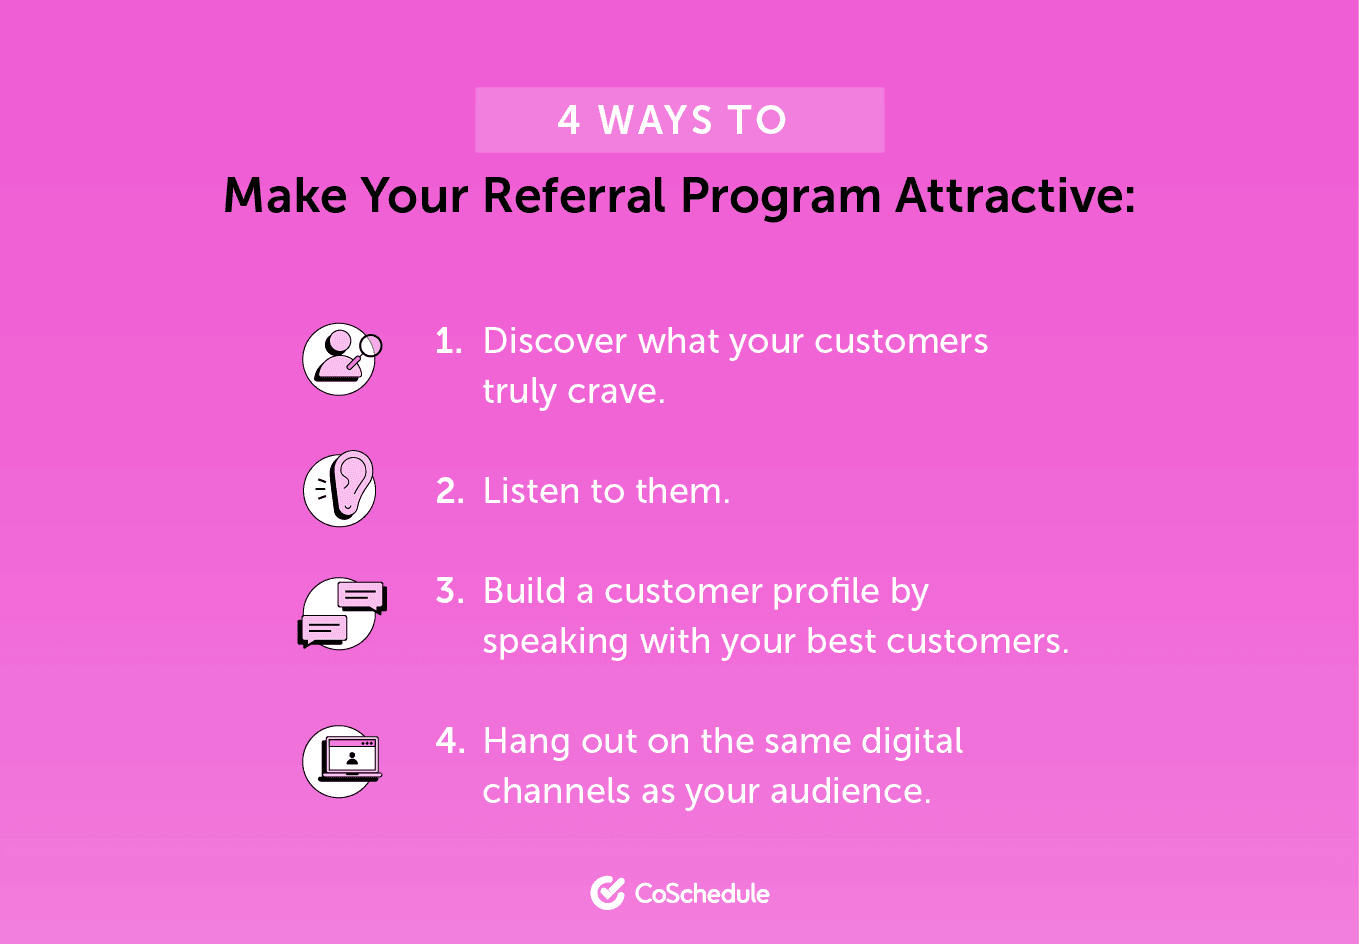 4 Ways to Make a Referral Program Attractive